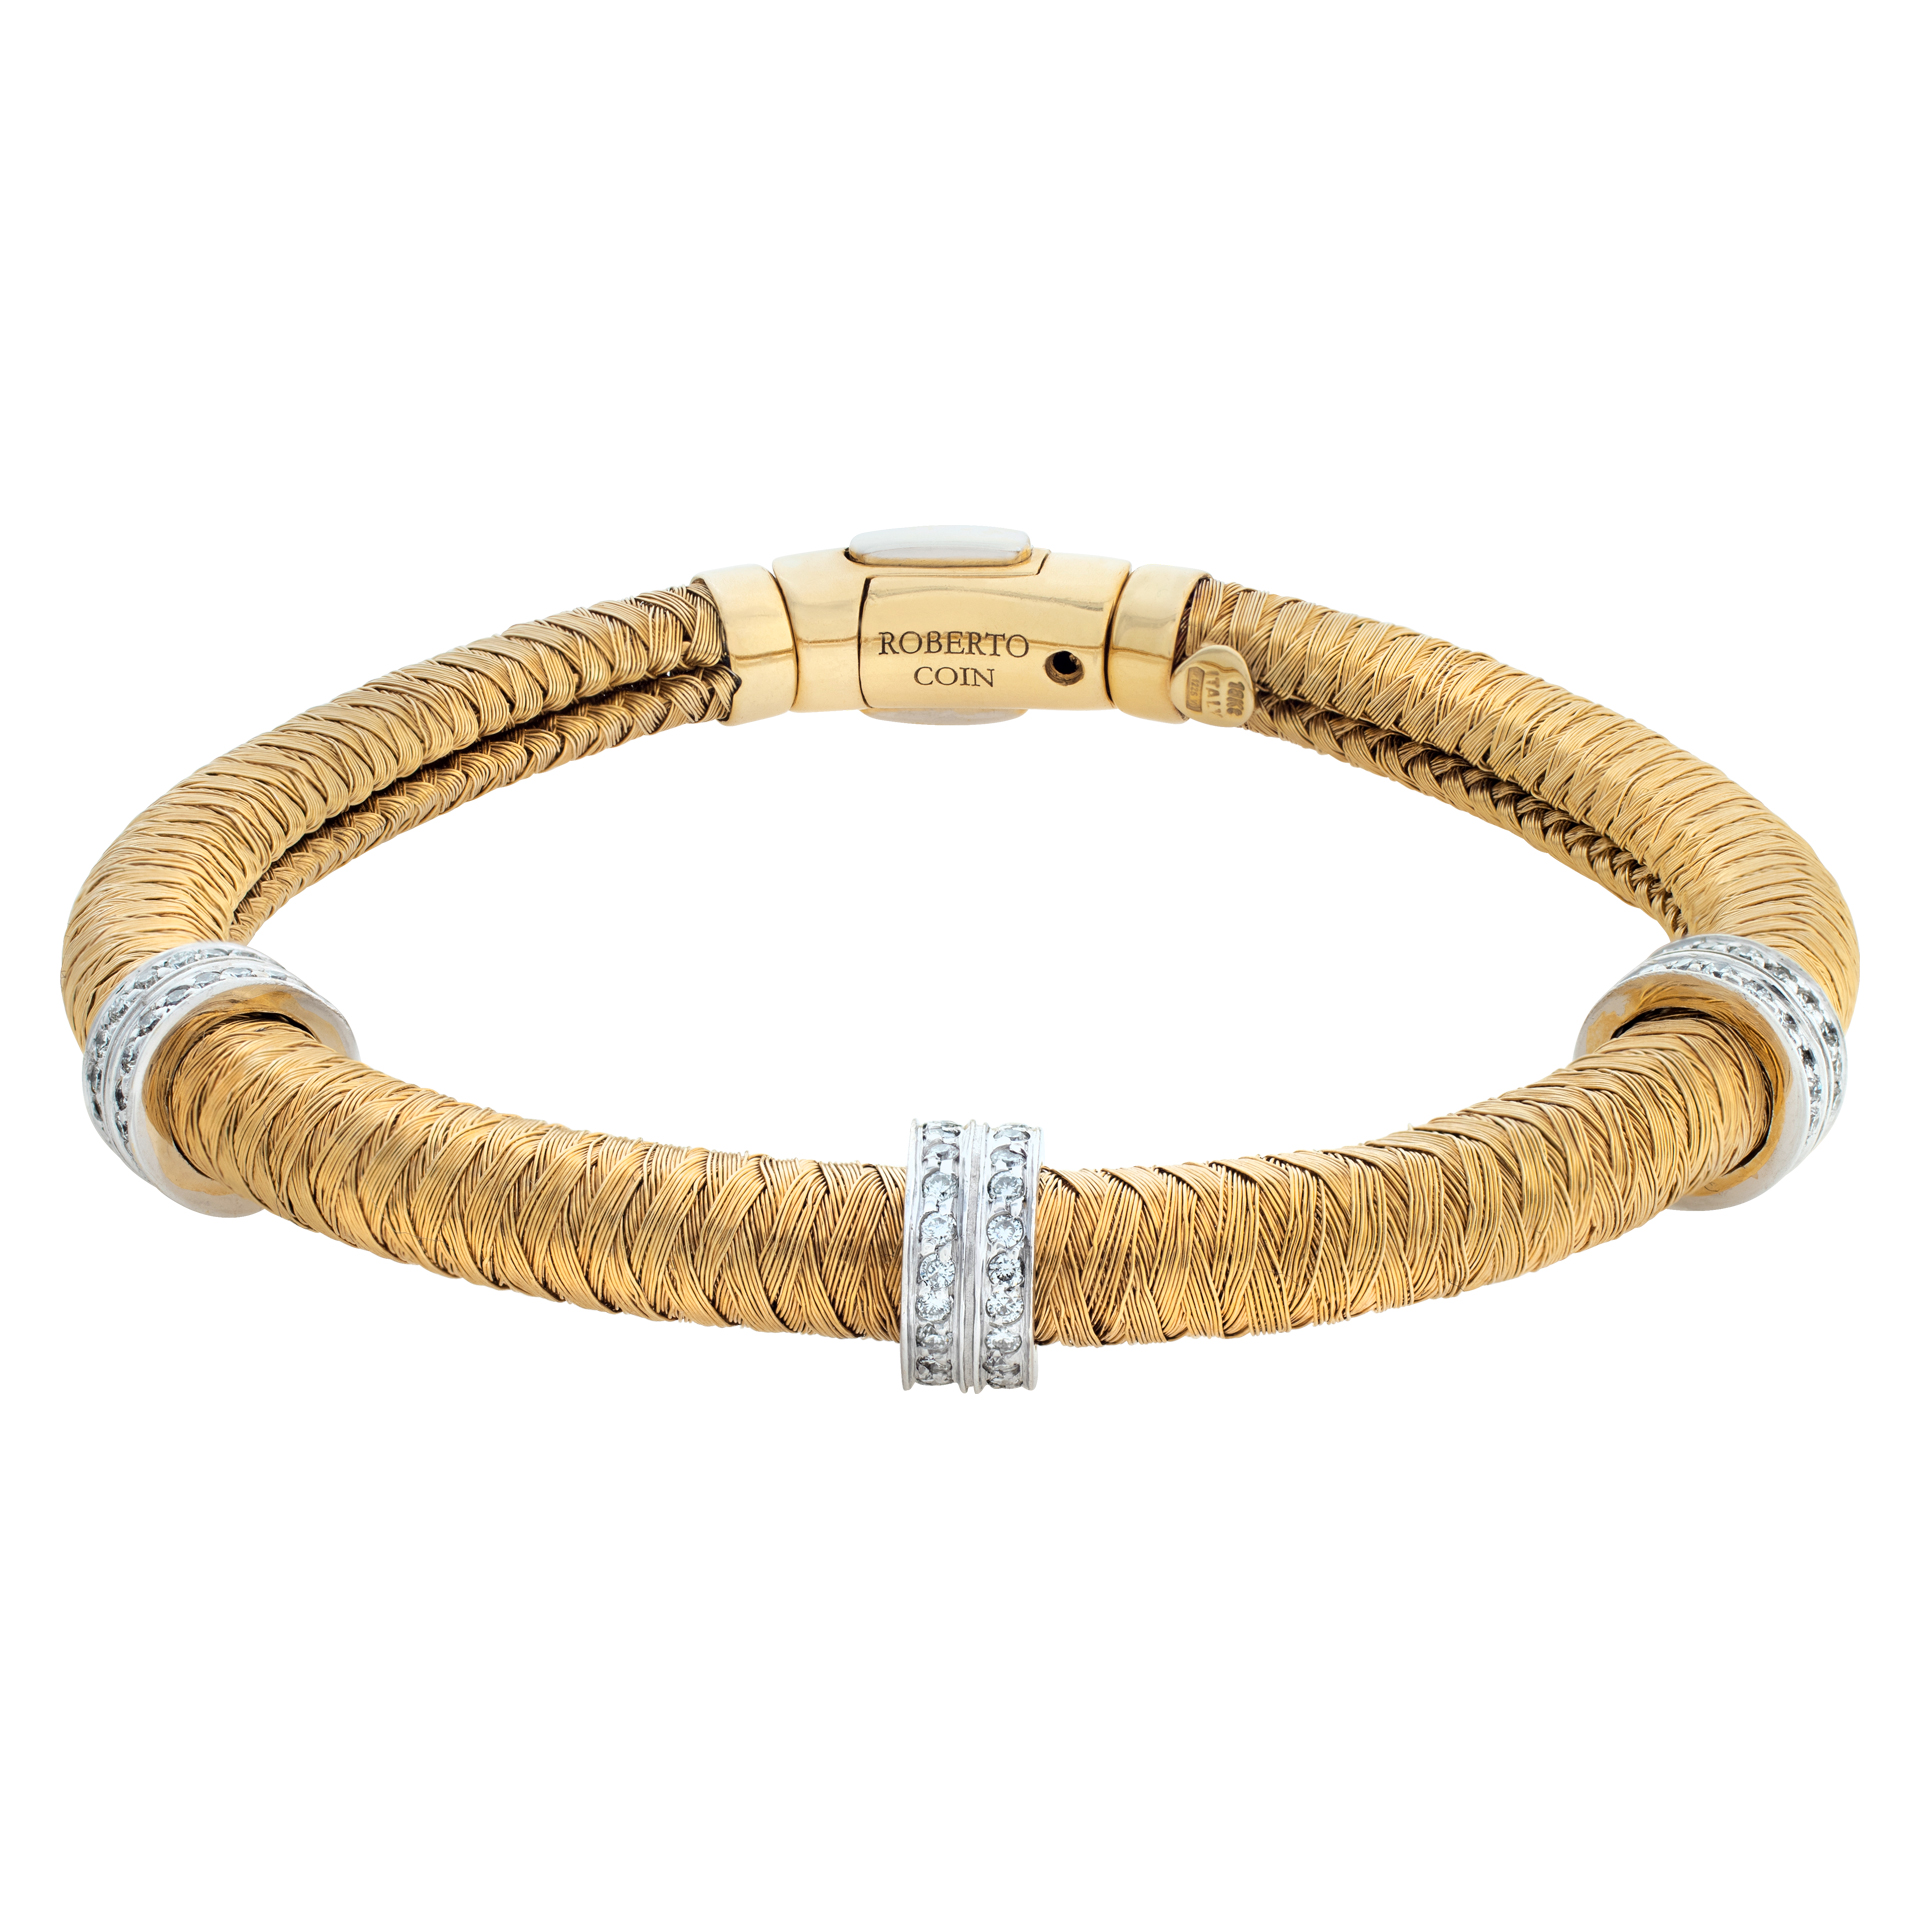 Roberto Coin Primavera Collection, Flexible Weaved Coil Bracelet In 18k Rose Gold With 3 White Gold Diamond Station